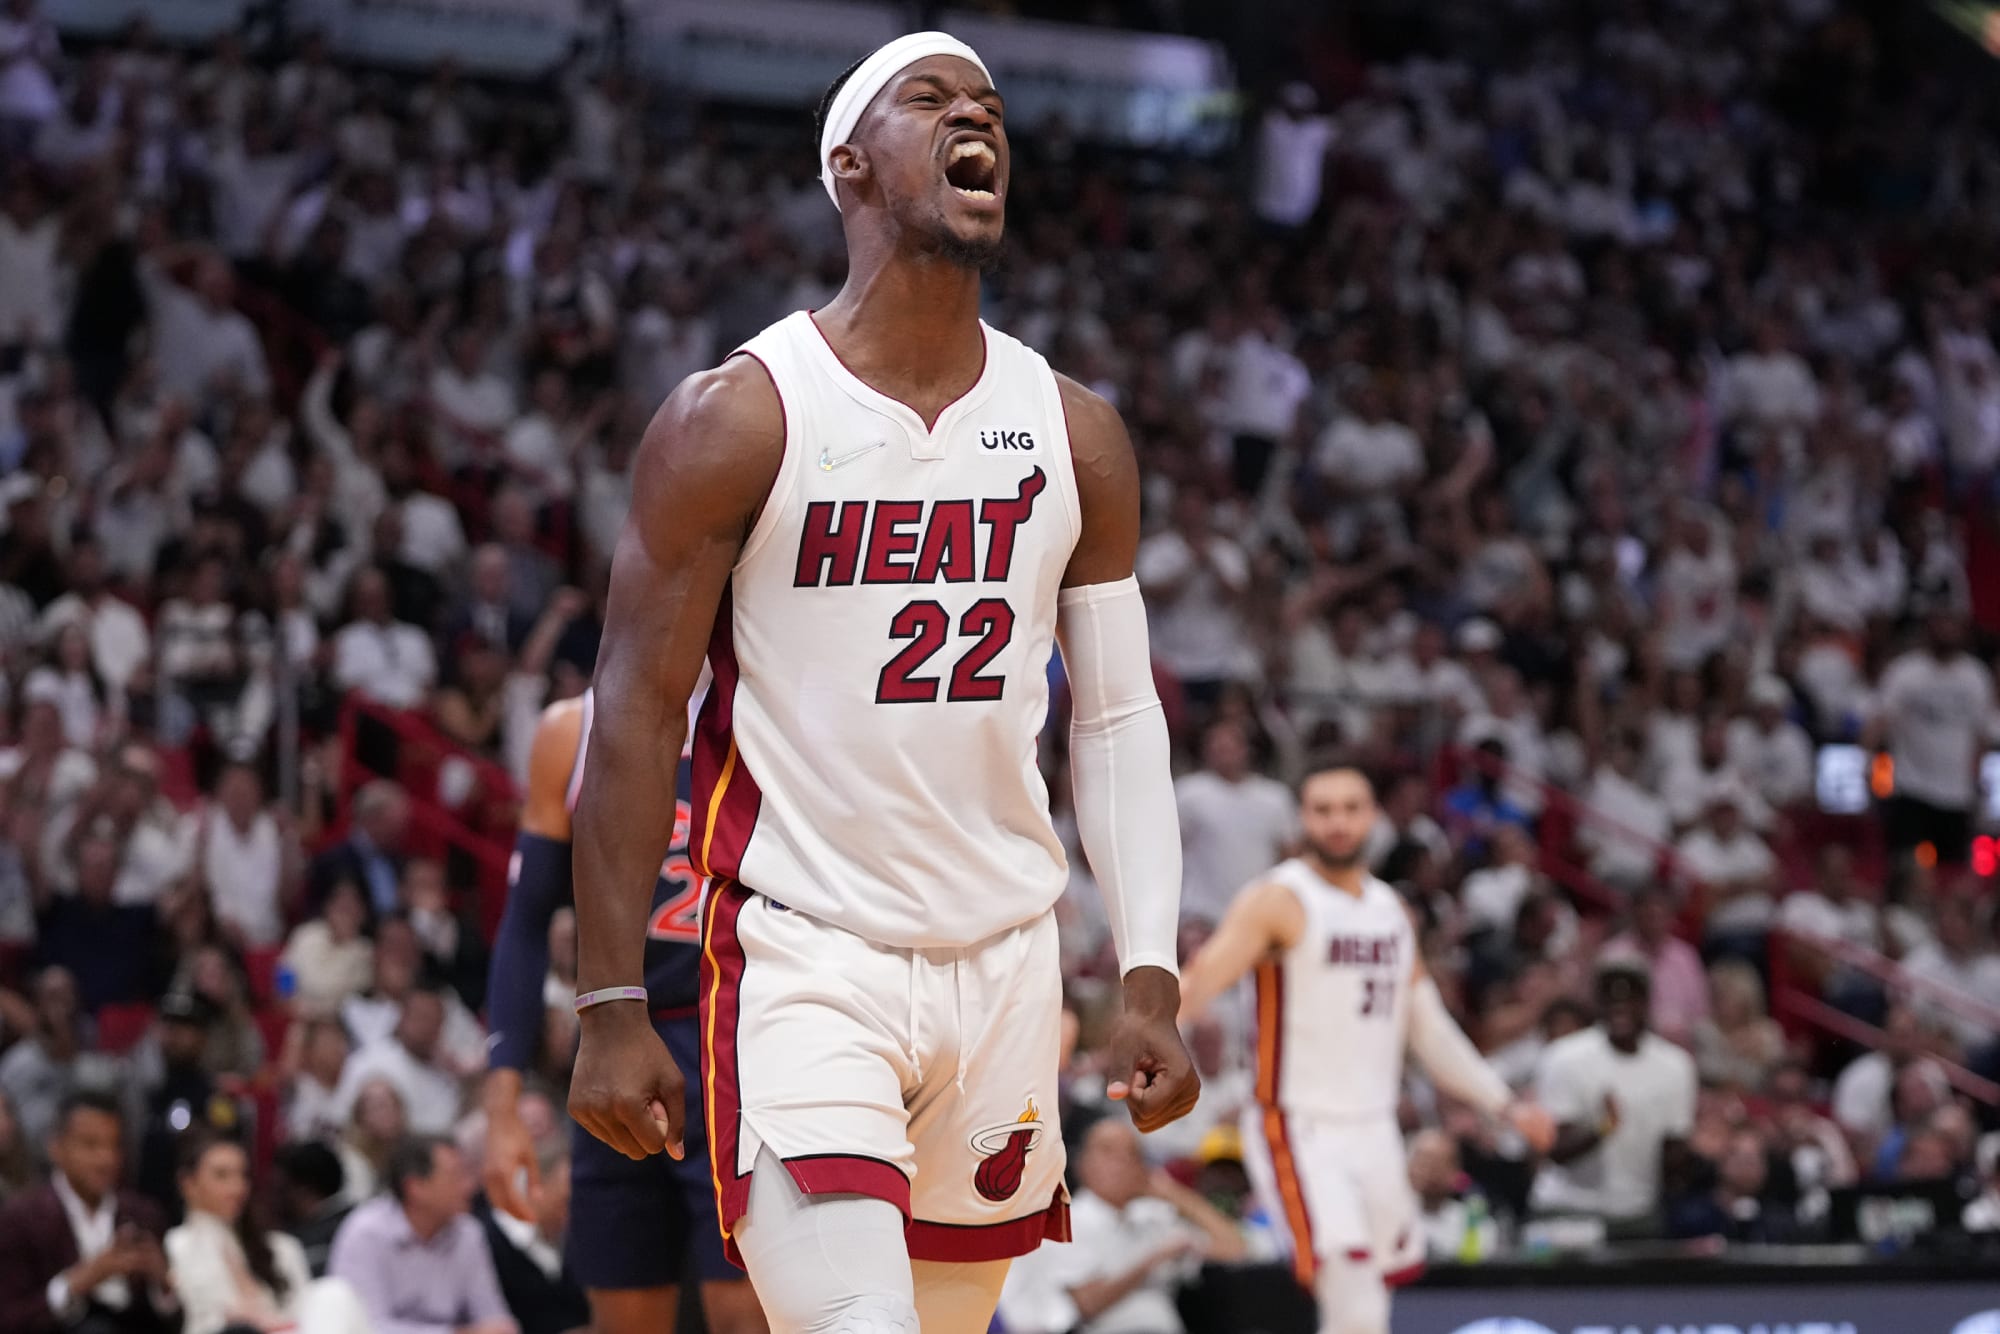 Miami Heat Playoffs Scoring Tables Turned In Game 5 But How Much?